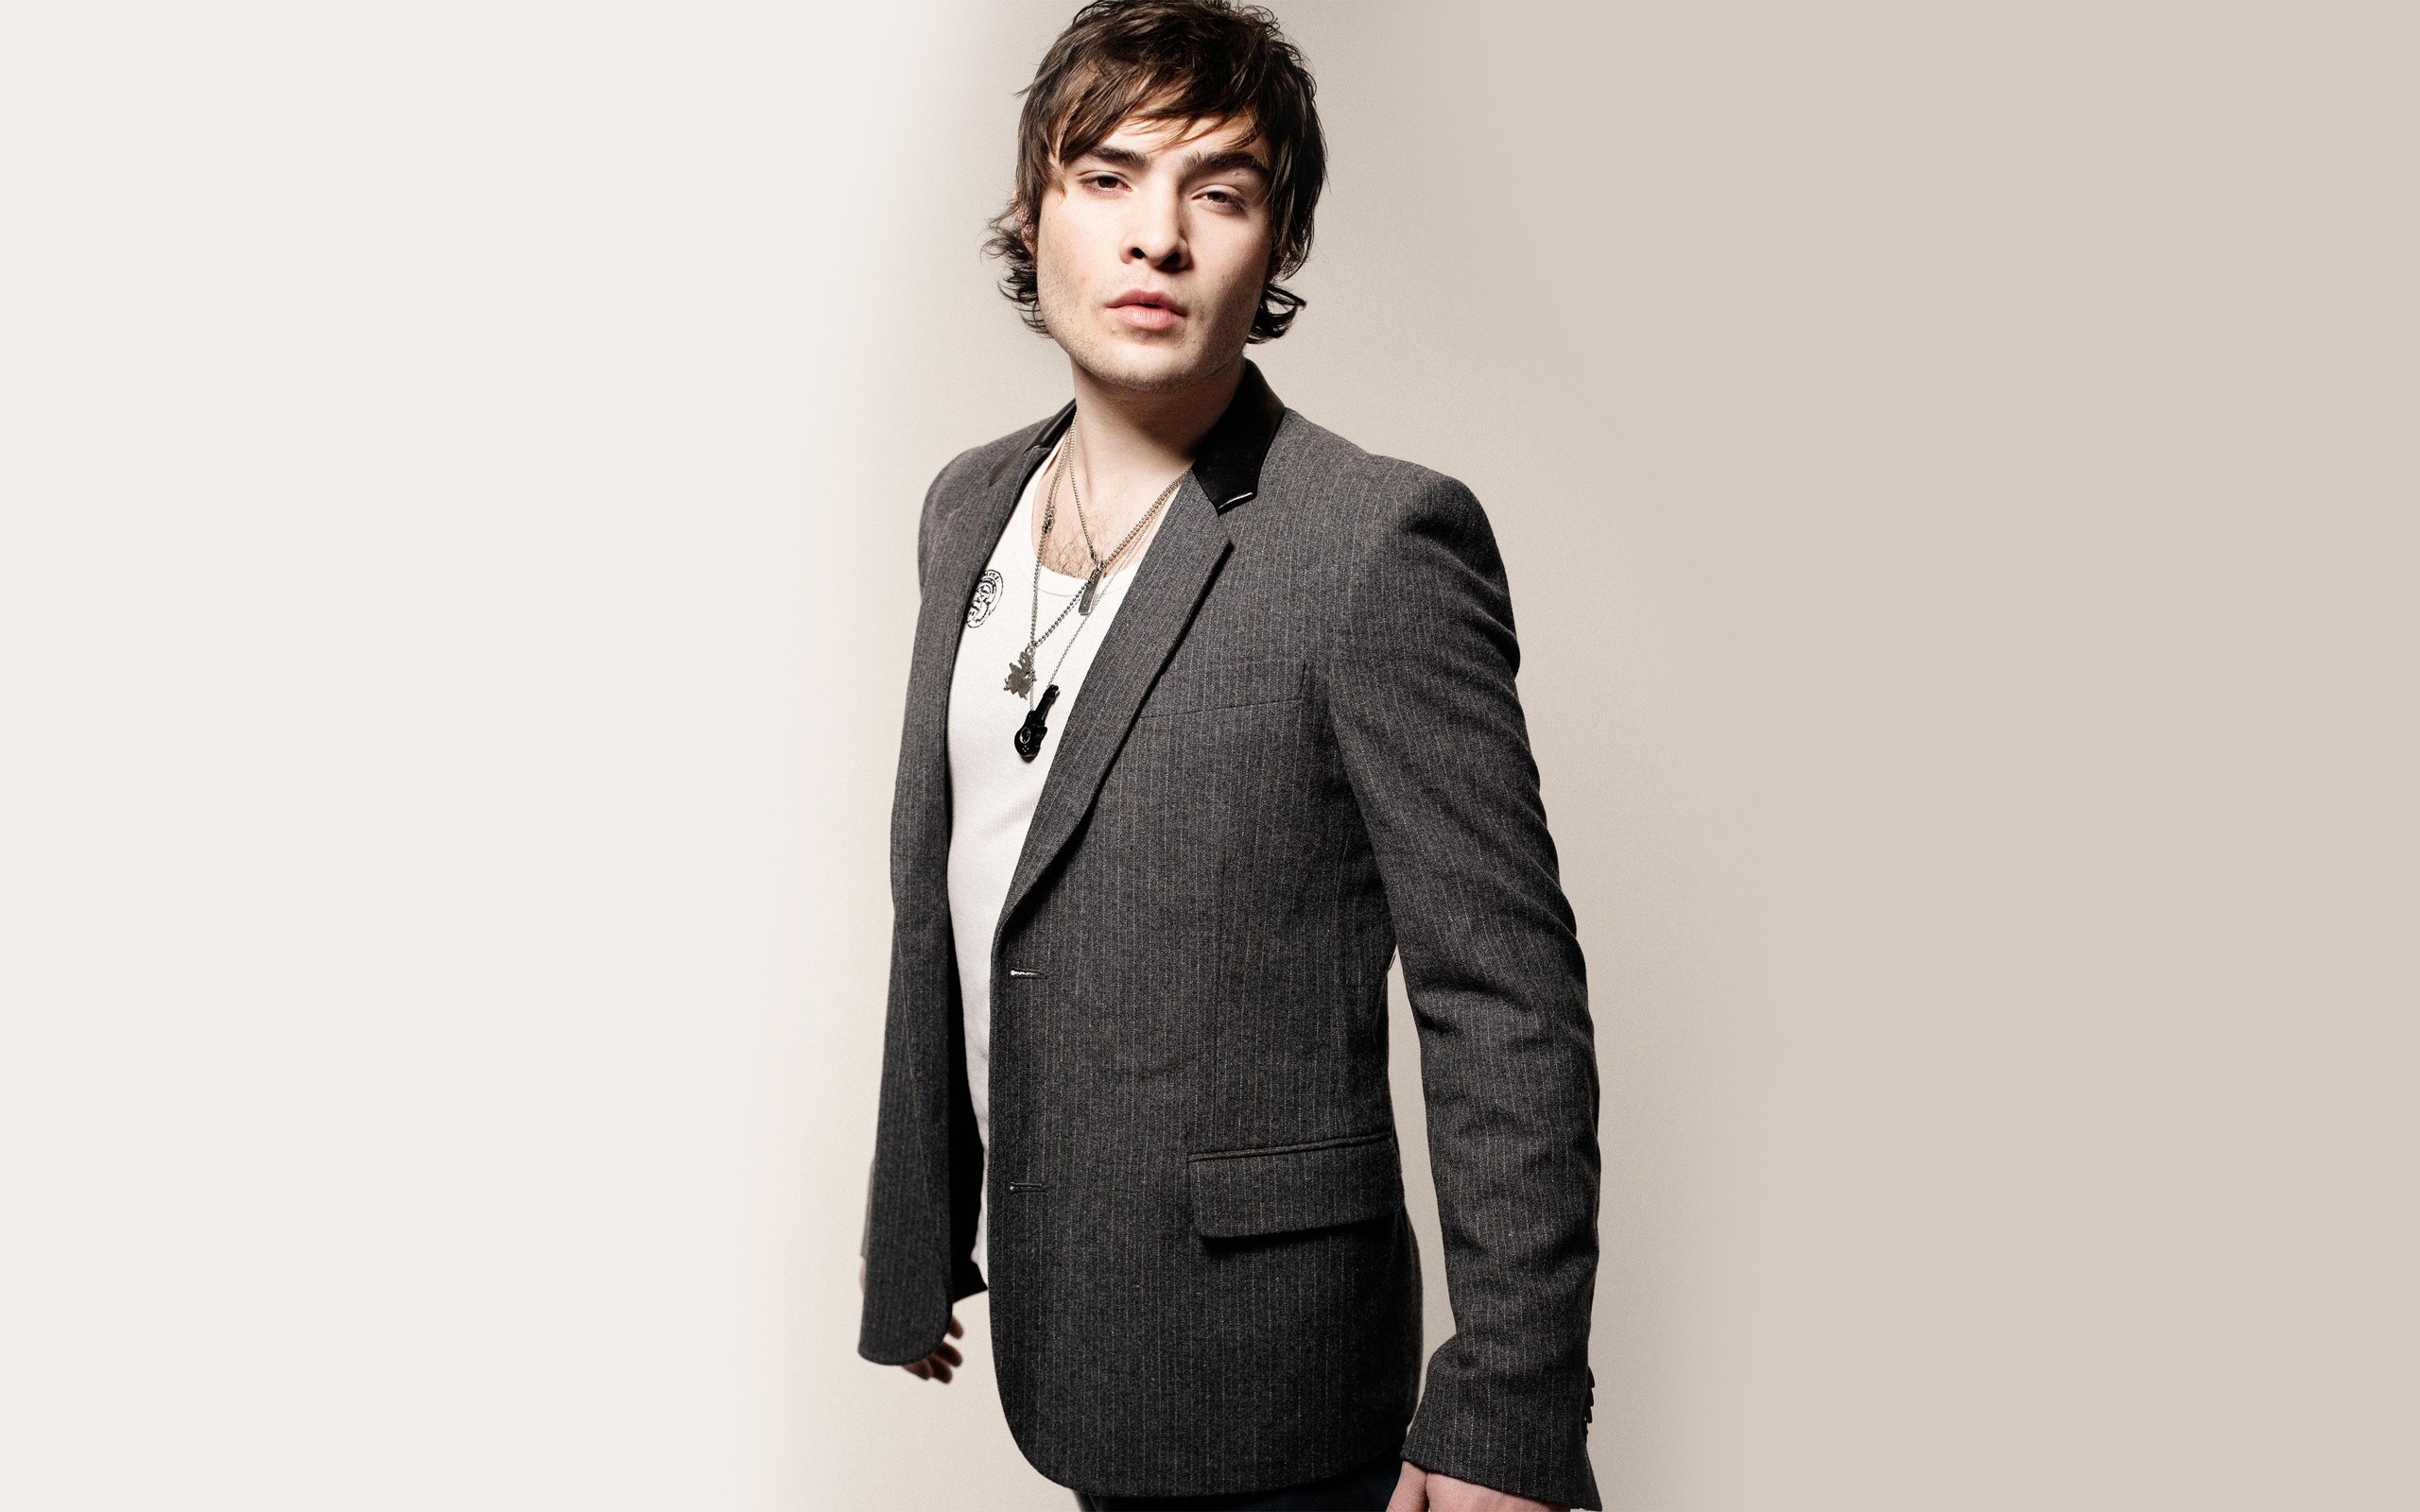 Ed Westwick Cool for 2560 x 1600 widescreen resolution